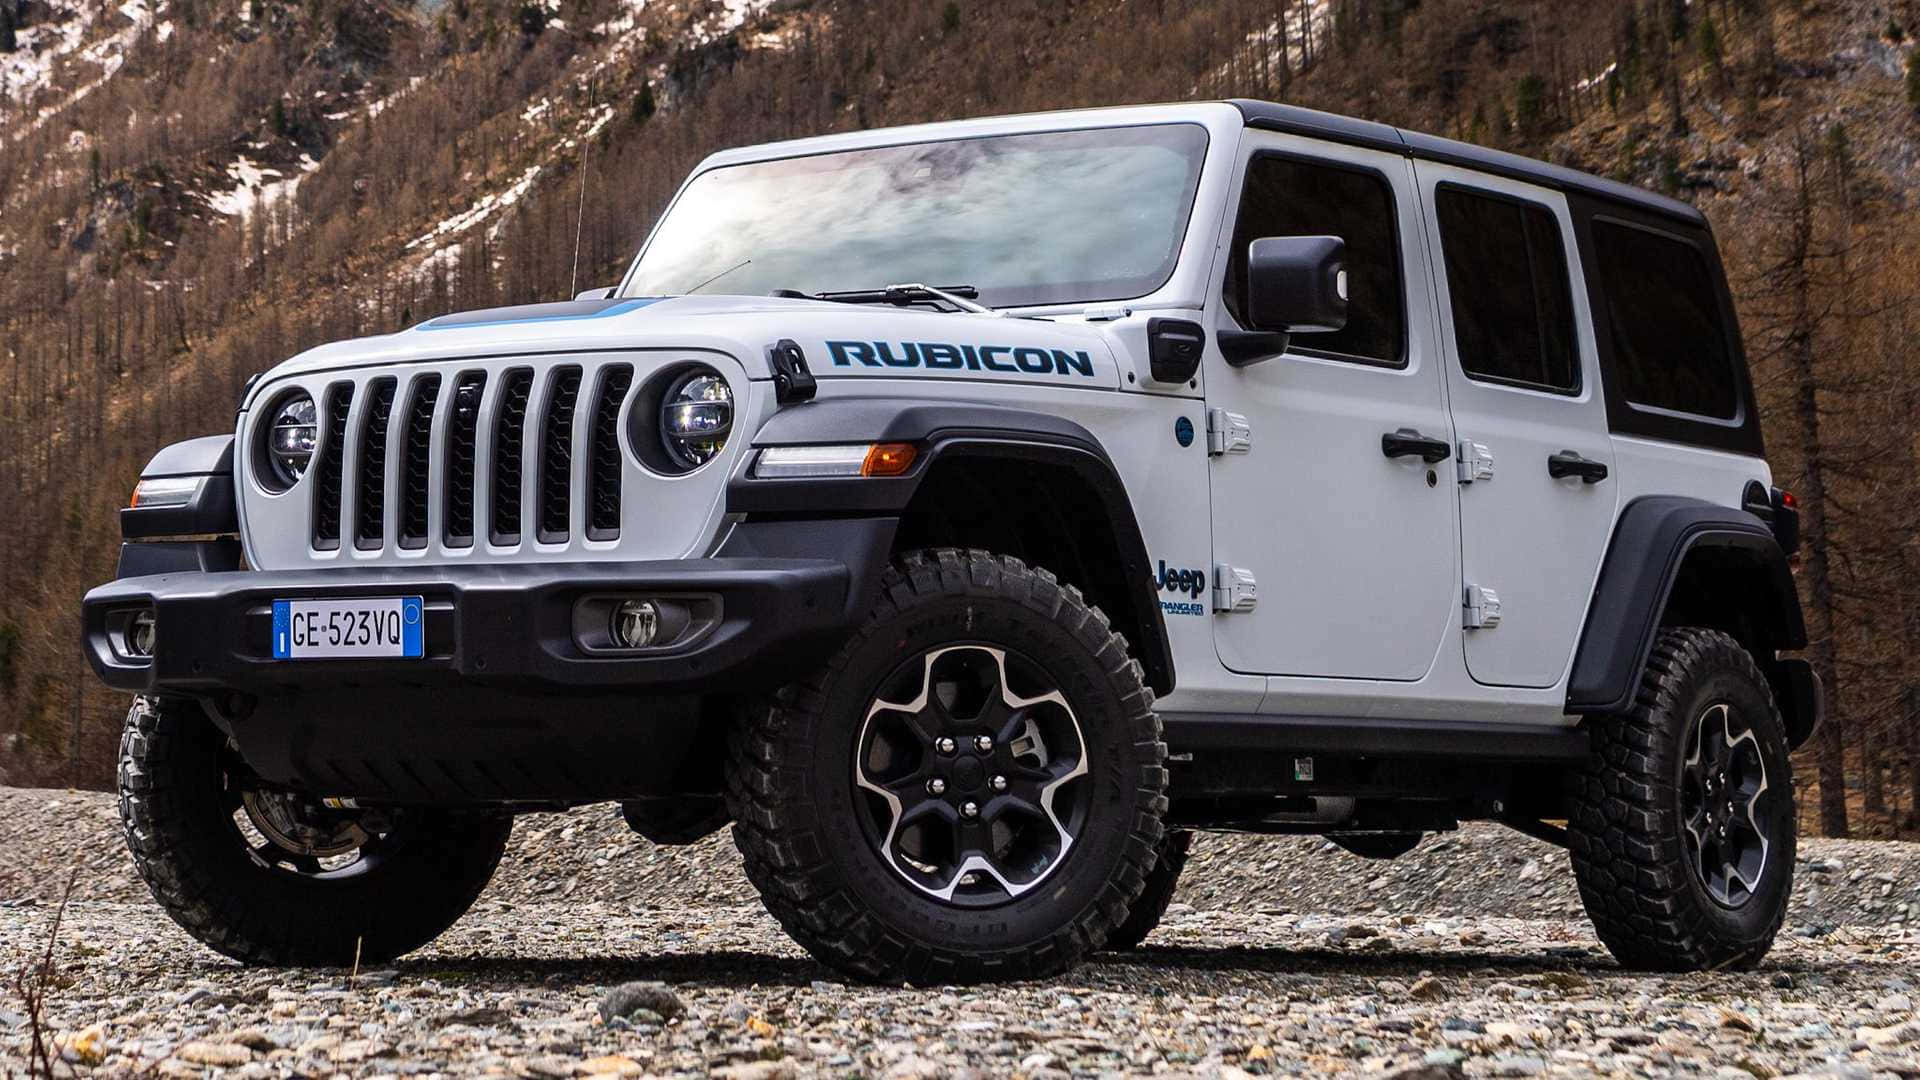 Explore the Outdoors in a Rugged Jeep